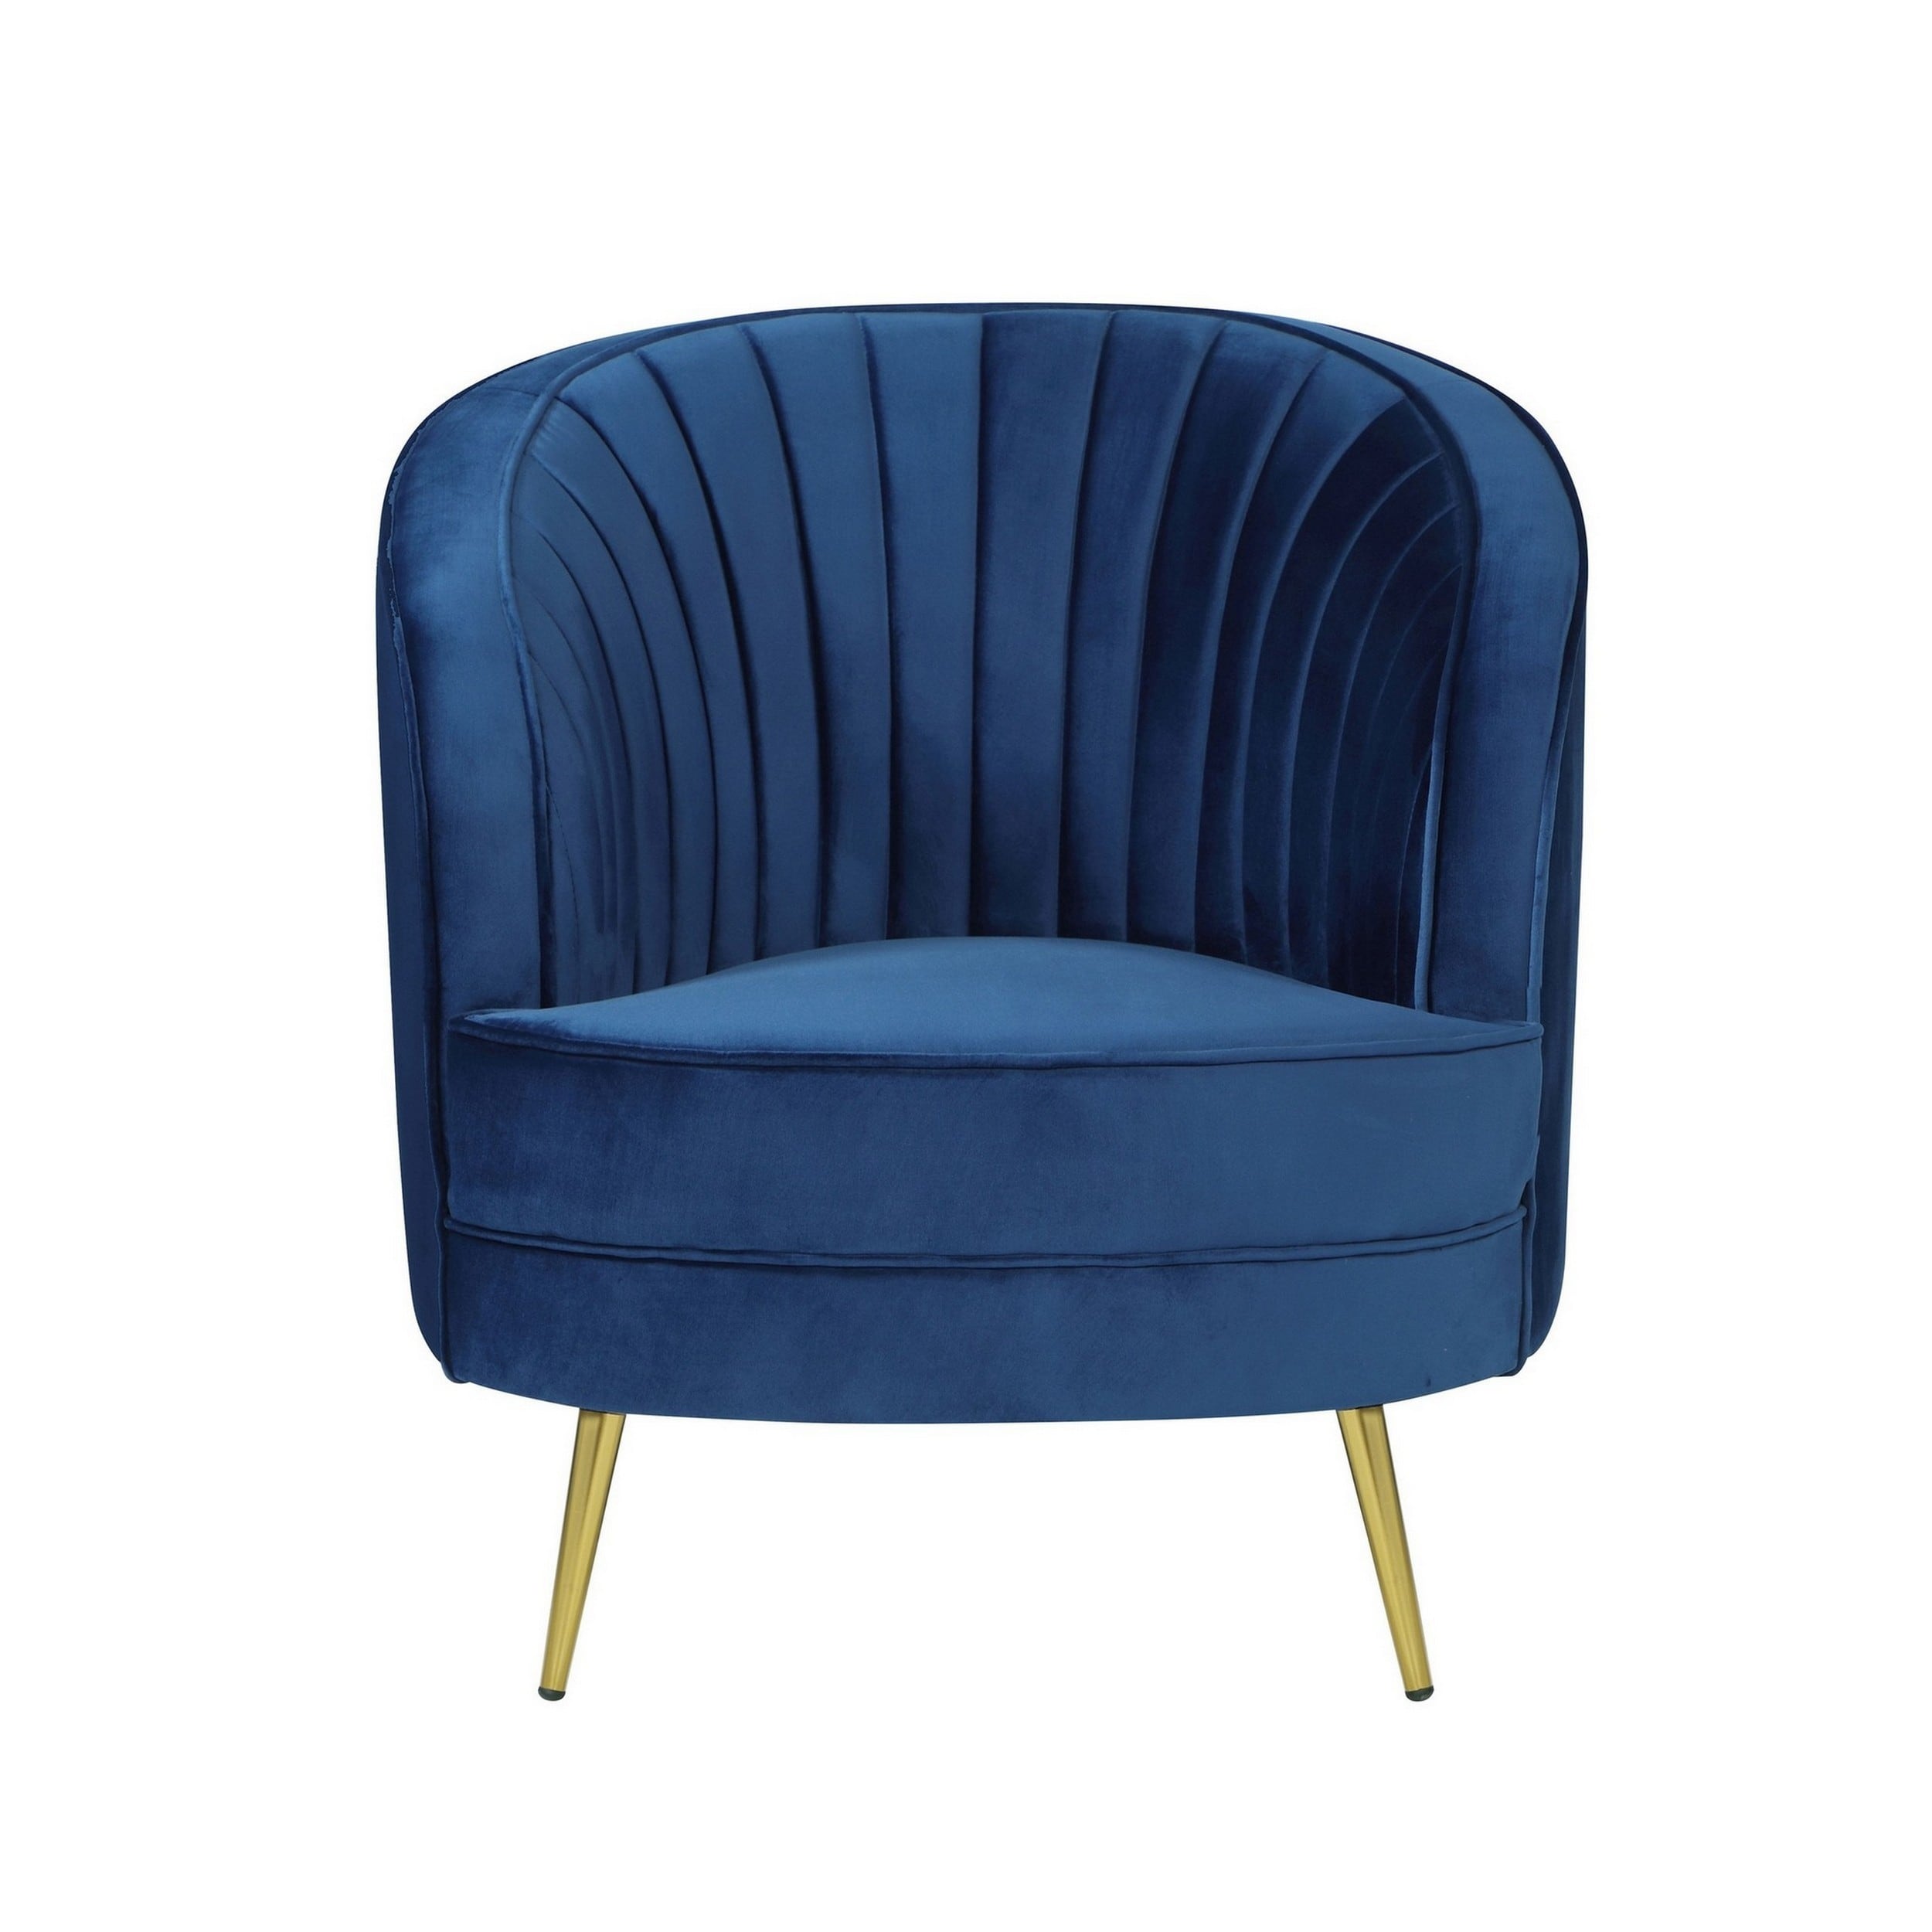 31 Inch Club Chair, Blue Velvet, Vertical Tufted Channels, Art Deco Style -  On Sale - Bed Bath & Beyond - 37569905